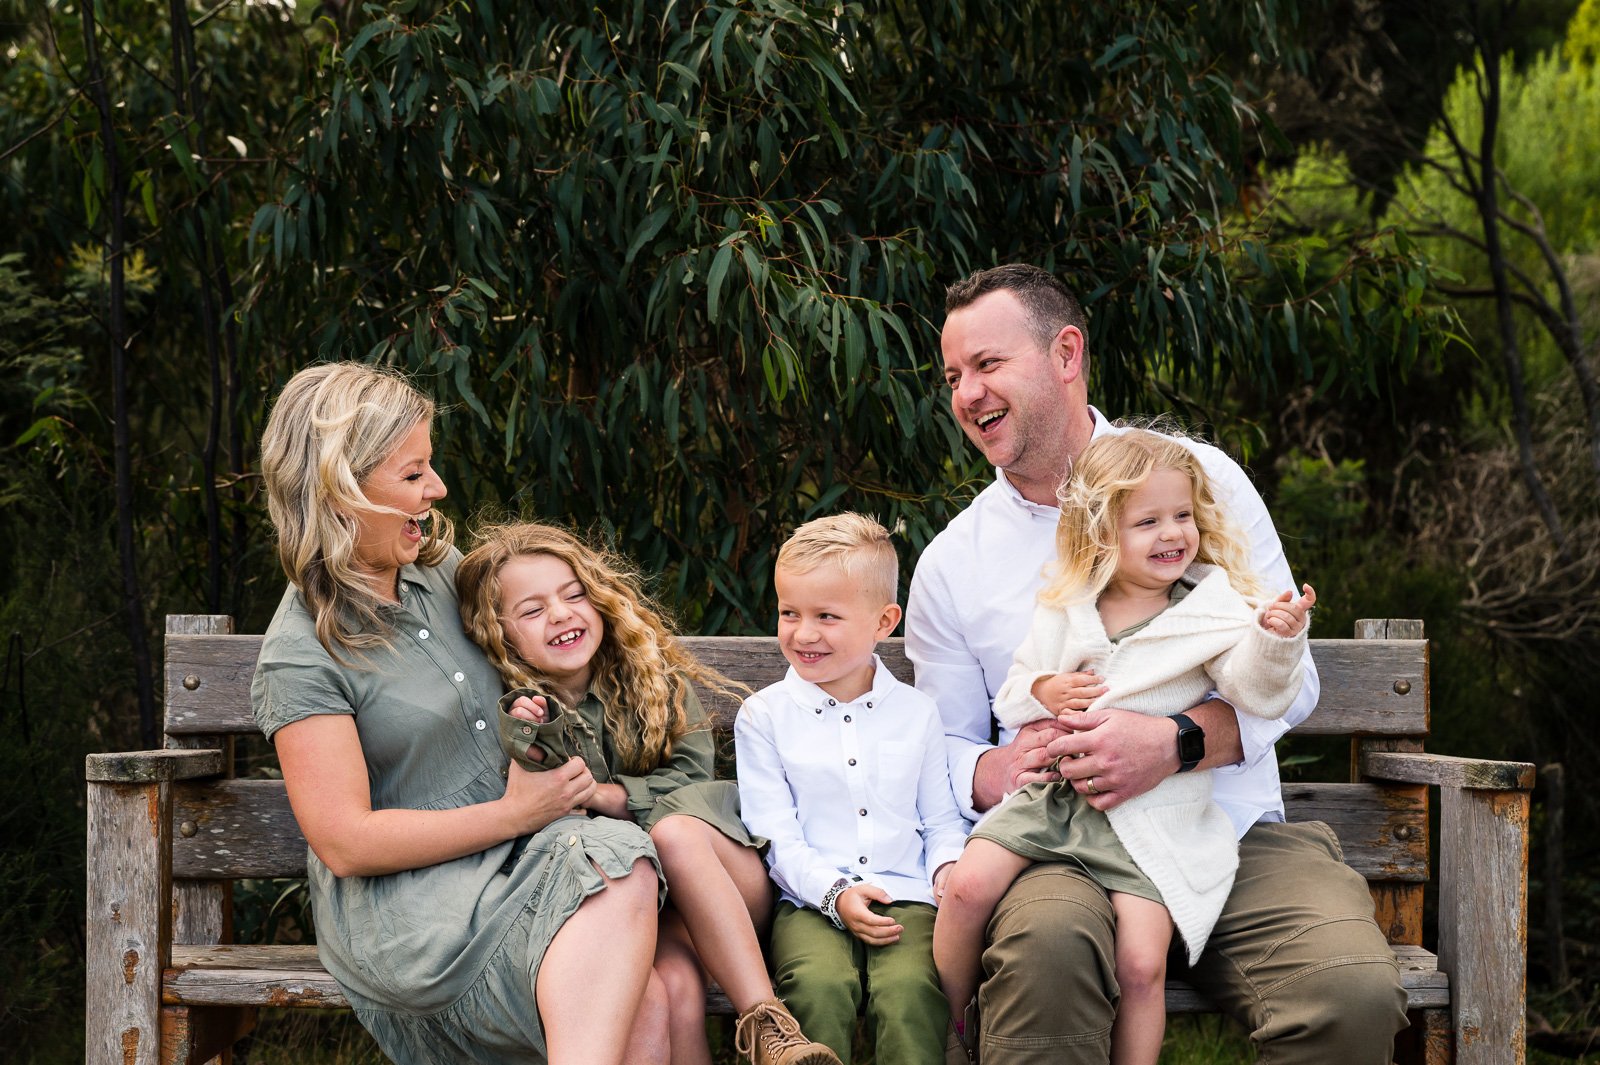 melbourne_family_photographer_together_laughing_bench_park_outdoors-1.jpg